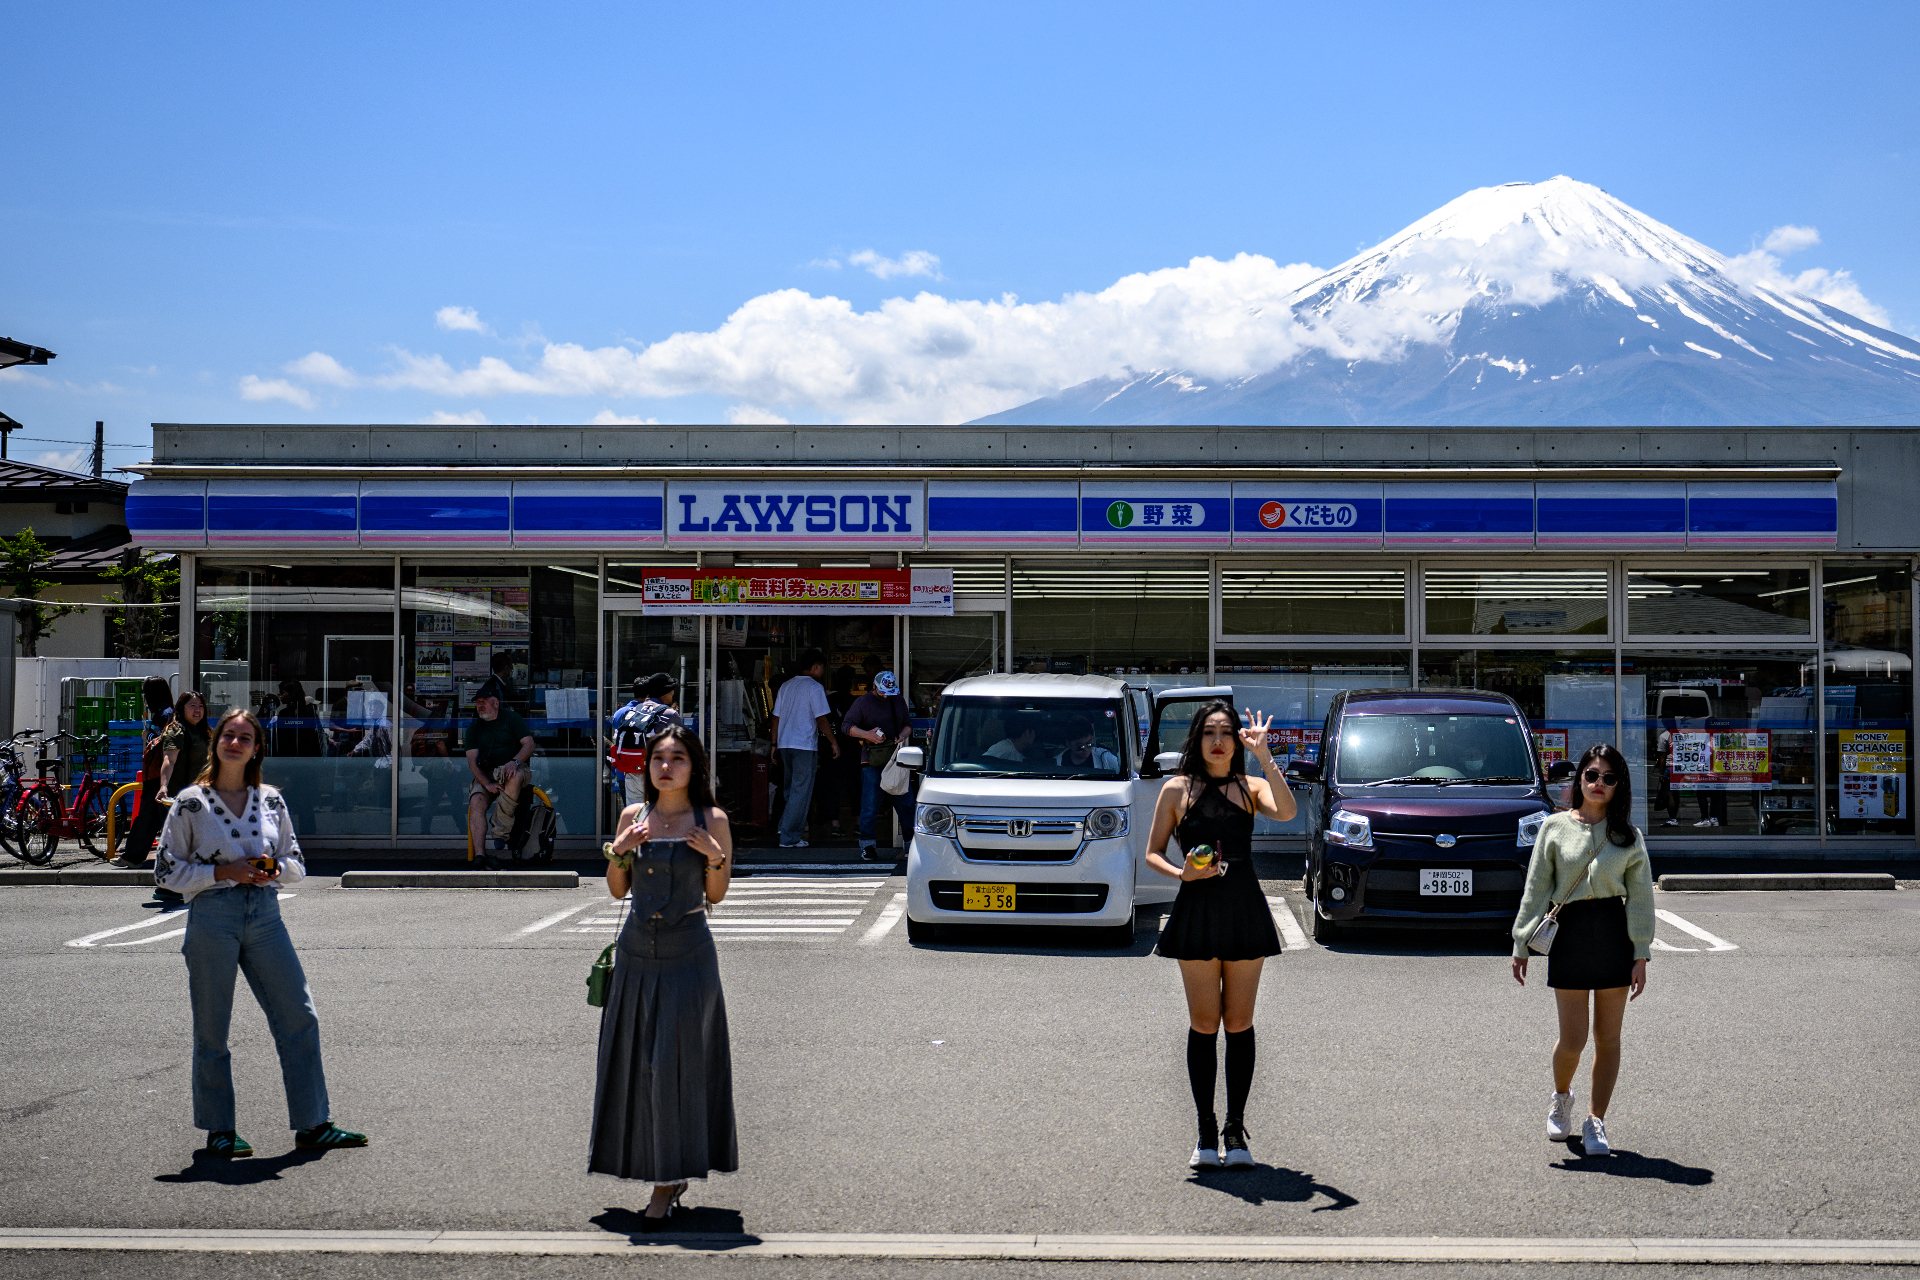 <p>The mesh net wall will cover the mountain view behind a Lawson convenience store, an ordinary staple in Japanese cities. According to The Guardian, combining both made it a viral photo spot.</p>